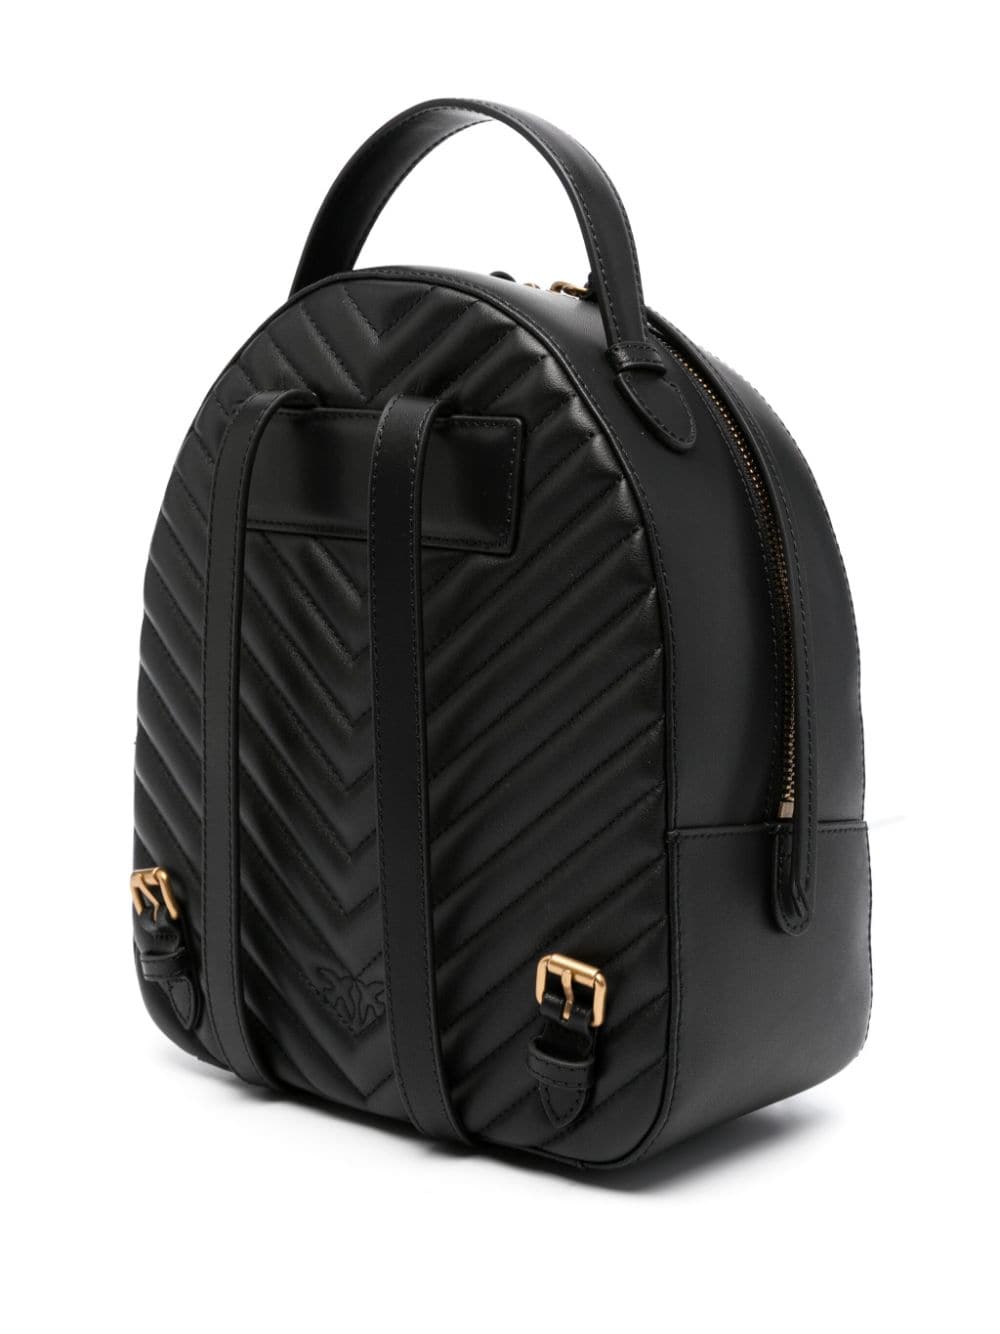 'Love Click' backpack